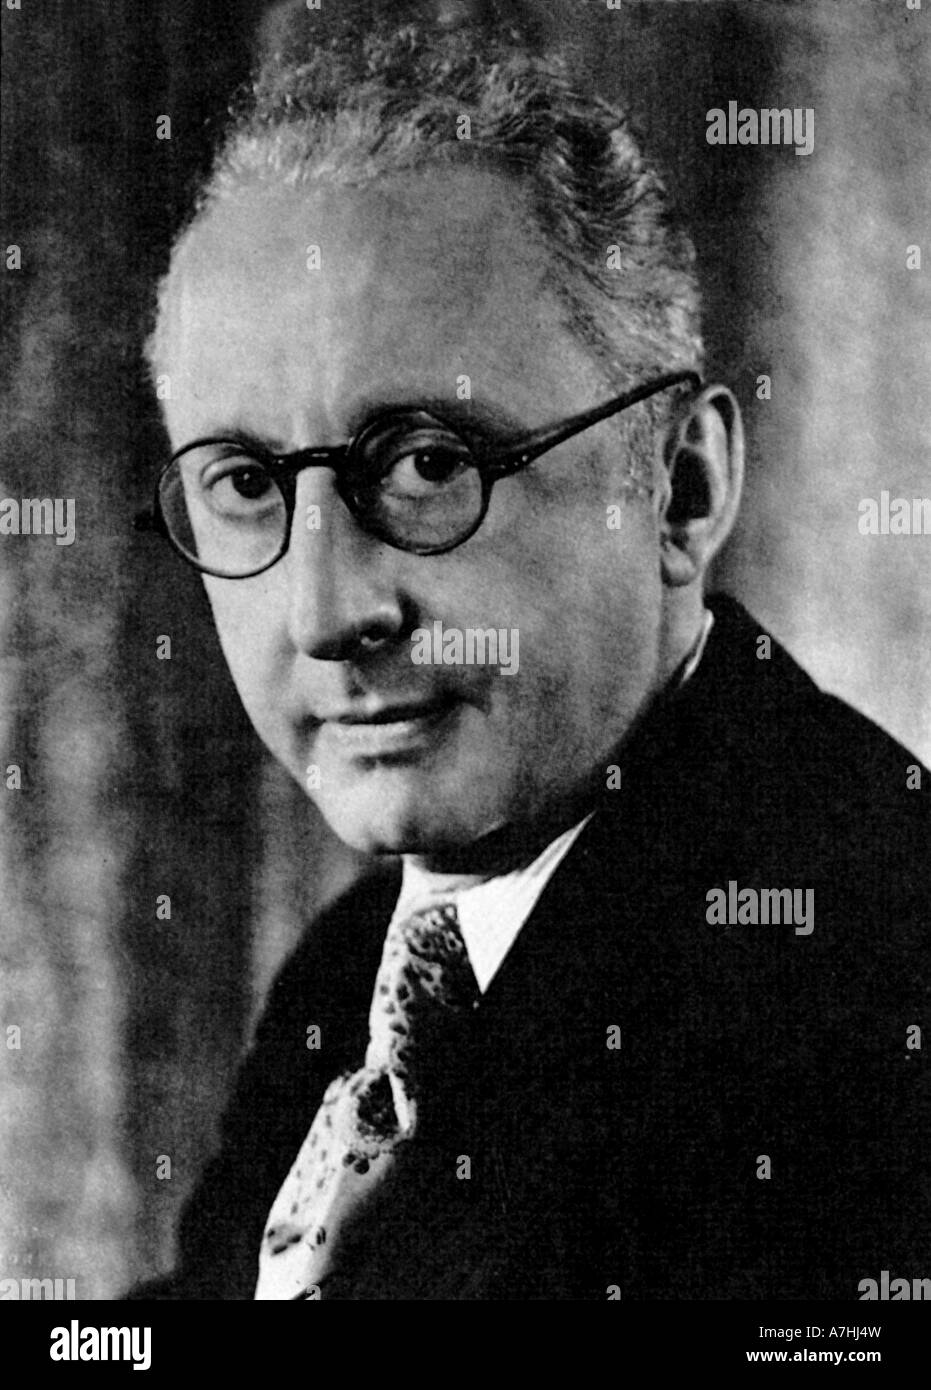 JEROME KERN - US composer 1885 to 1945 Stock Photo